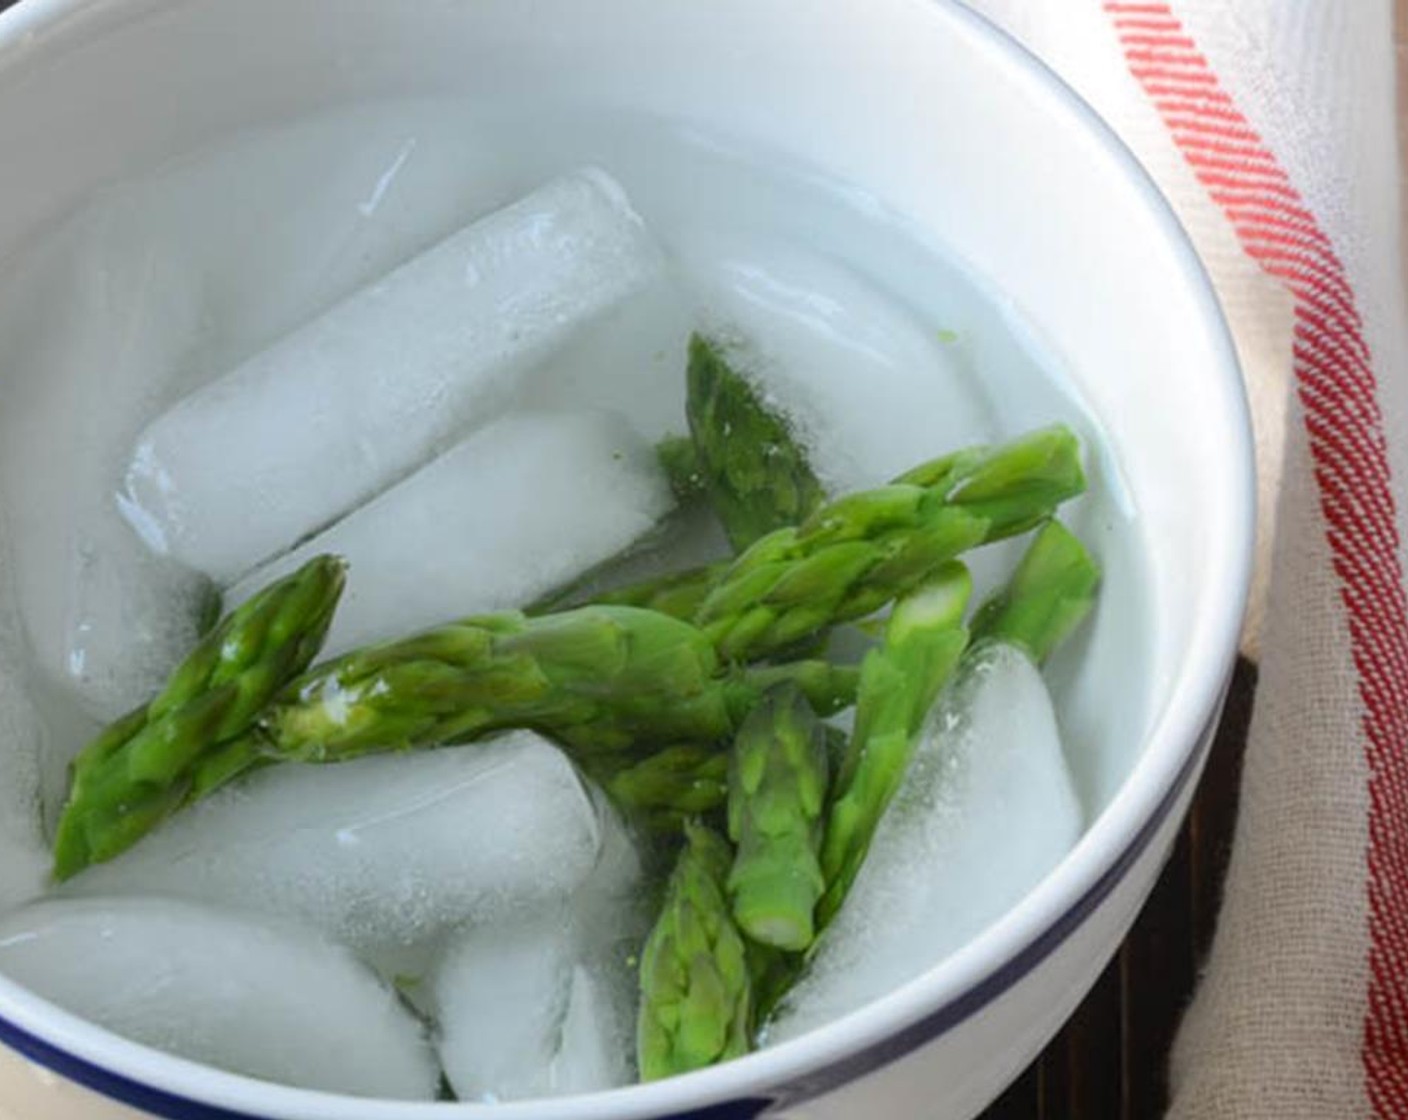 step 7 Add the asparagus tips to the boiling water and cook for 1-2 minutes until just tender. Use a slotted spoon or spider to transfer the asparagus tips from the boiling water to the ice bath to shock them and stop the cooking. Set aside until ready to serve.